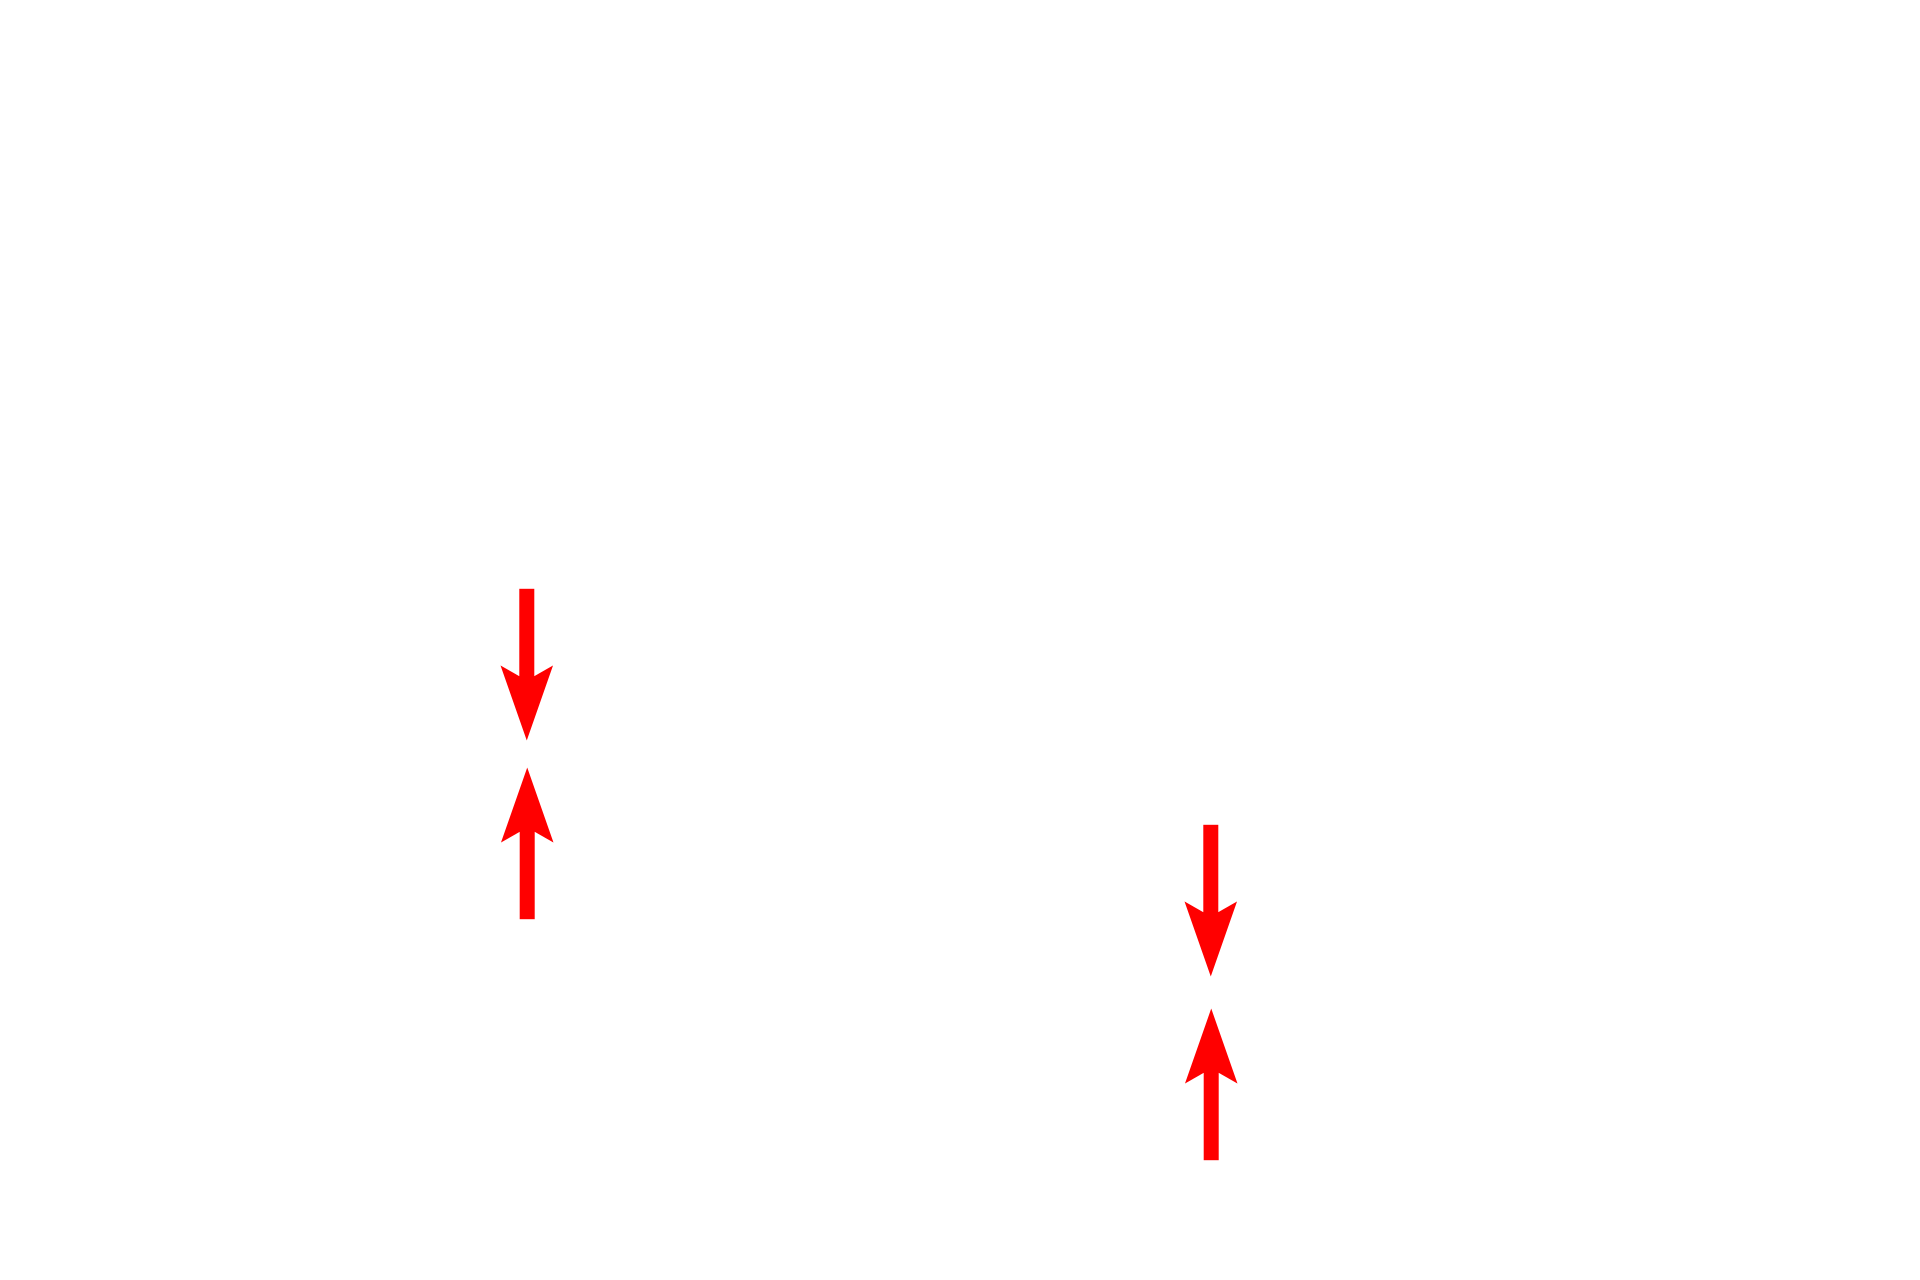  - Nuclear envelope <p>Proteins for export and membrane insertion are synthesized by the RER and transferred to the Golgi via transport vesicles.  Transport vesicles fuse with the cis or forming face of the Golgi.  The proteins from the vesicles are post-translationally modified while moving toward the trans or maturing face. There, they are packaged into vesicles and secretory granules for transport to the plasma membrane.</p>
